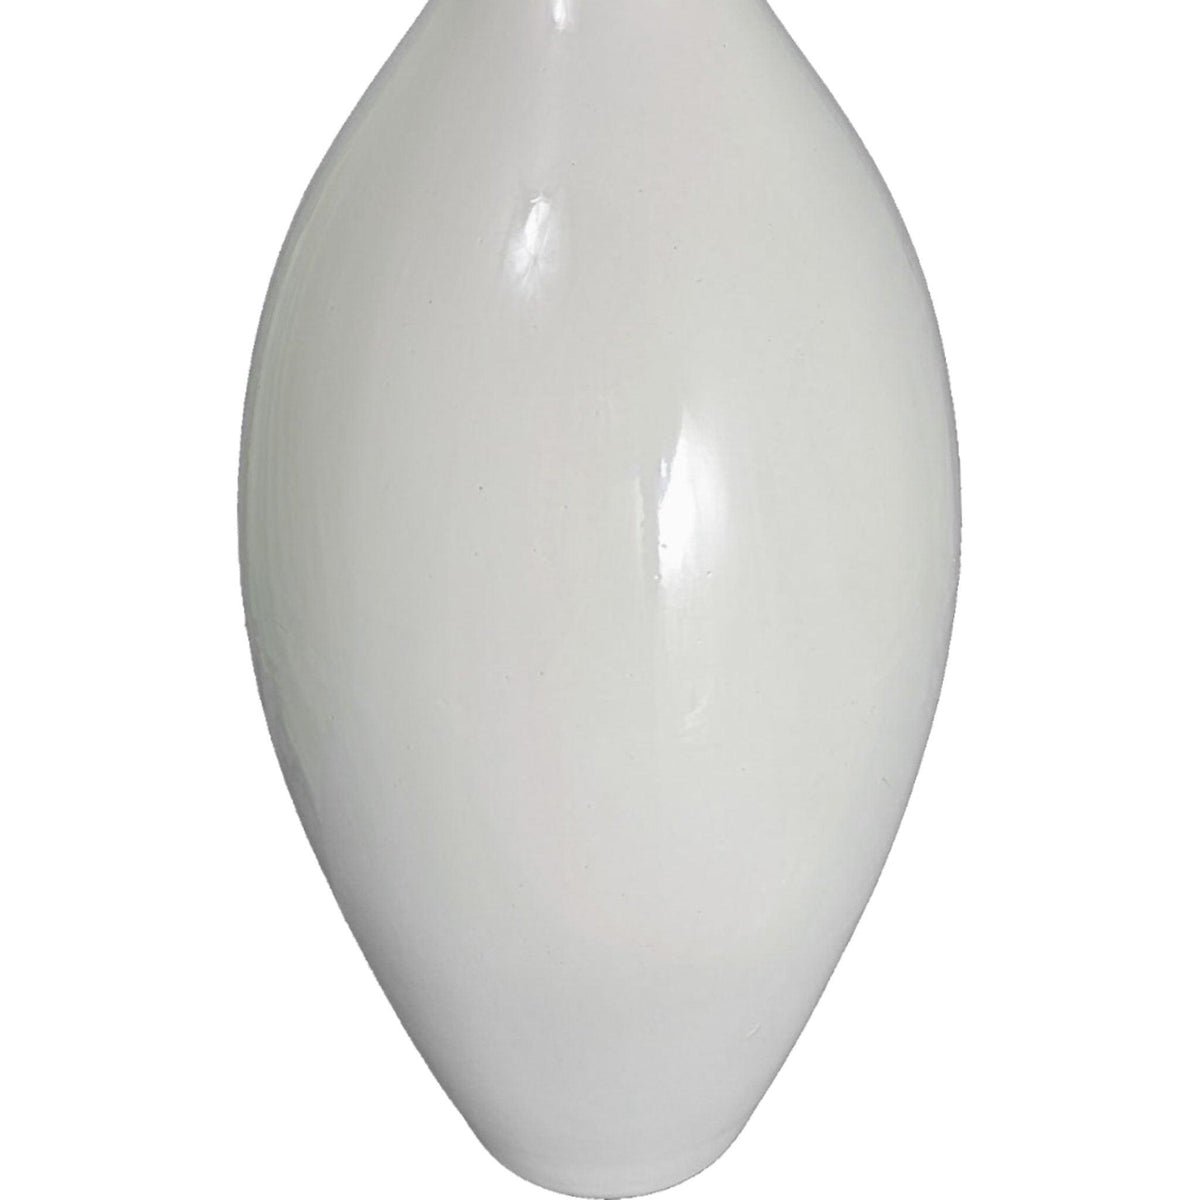 Lee Display's brand new 20in Roman Ceramic Vase comes in a high gloss white finish on sale at leedisplay.com